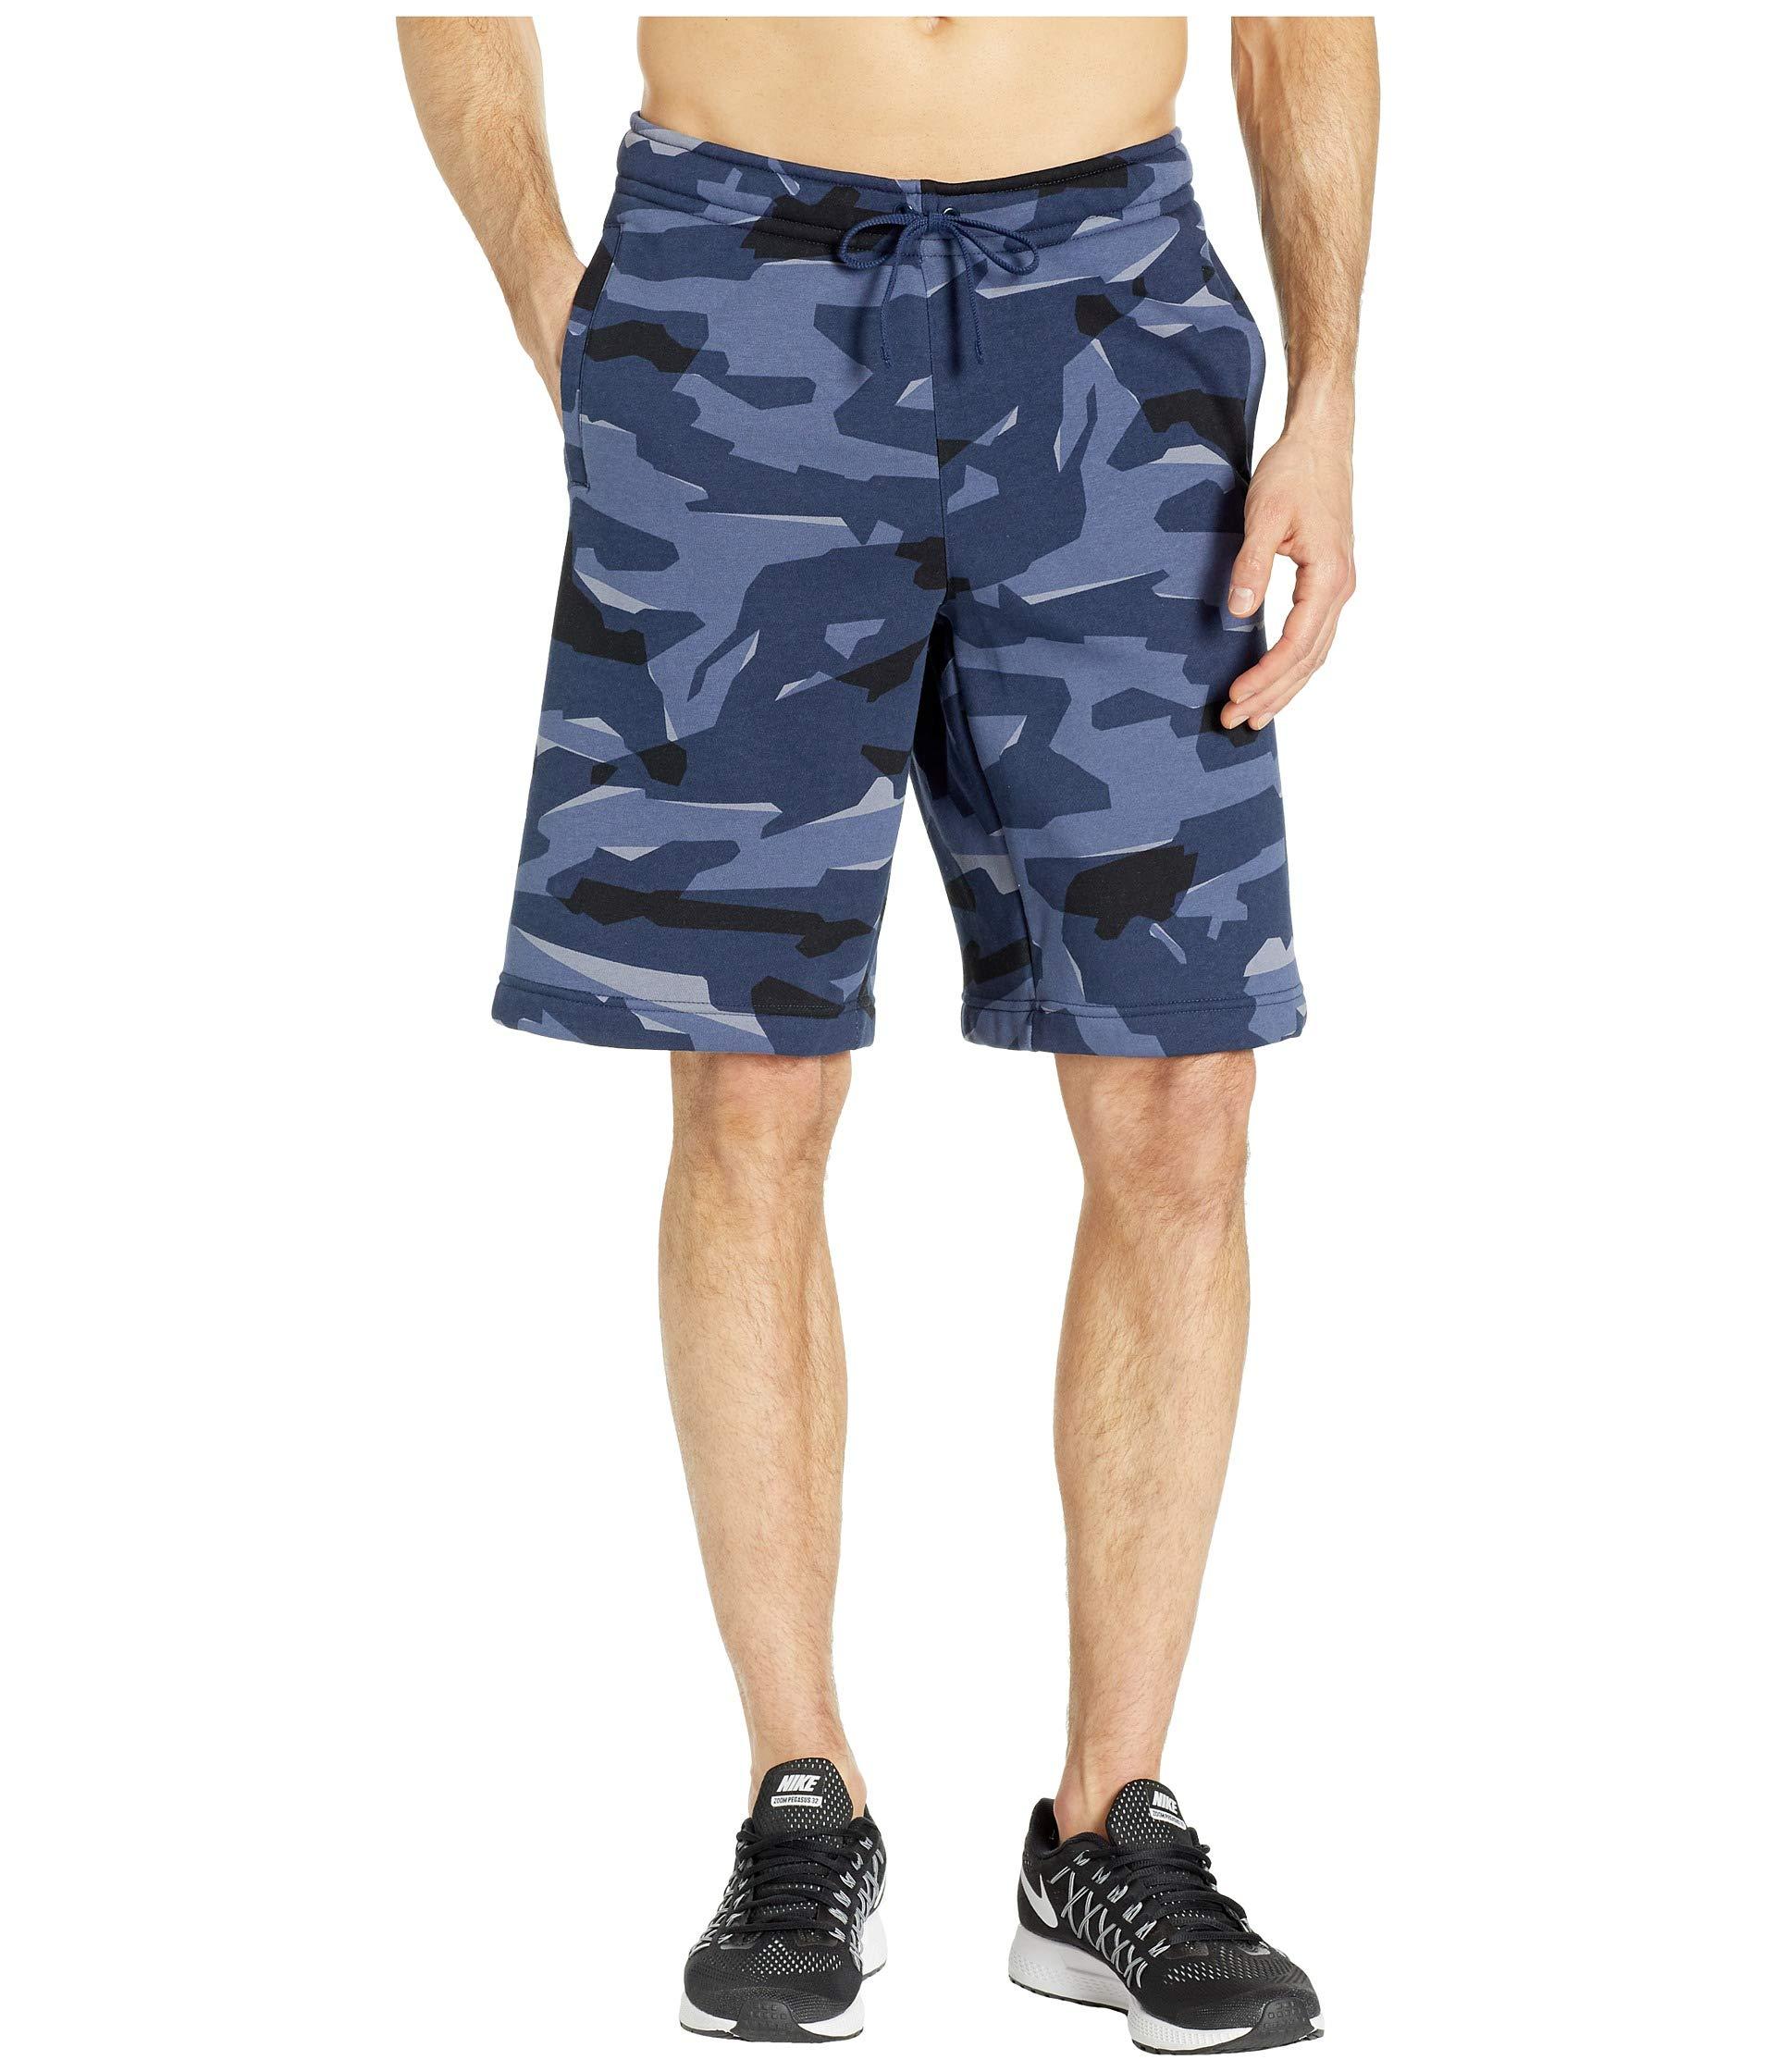 Nike Fleece Club Camouflage - Print Sweat Shorts in Navy/White (Blue) for  Men - Lyst